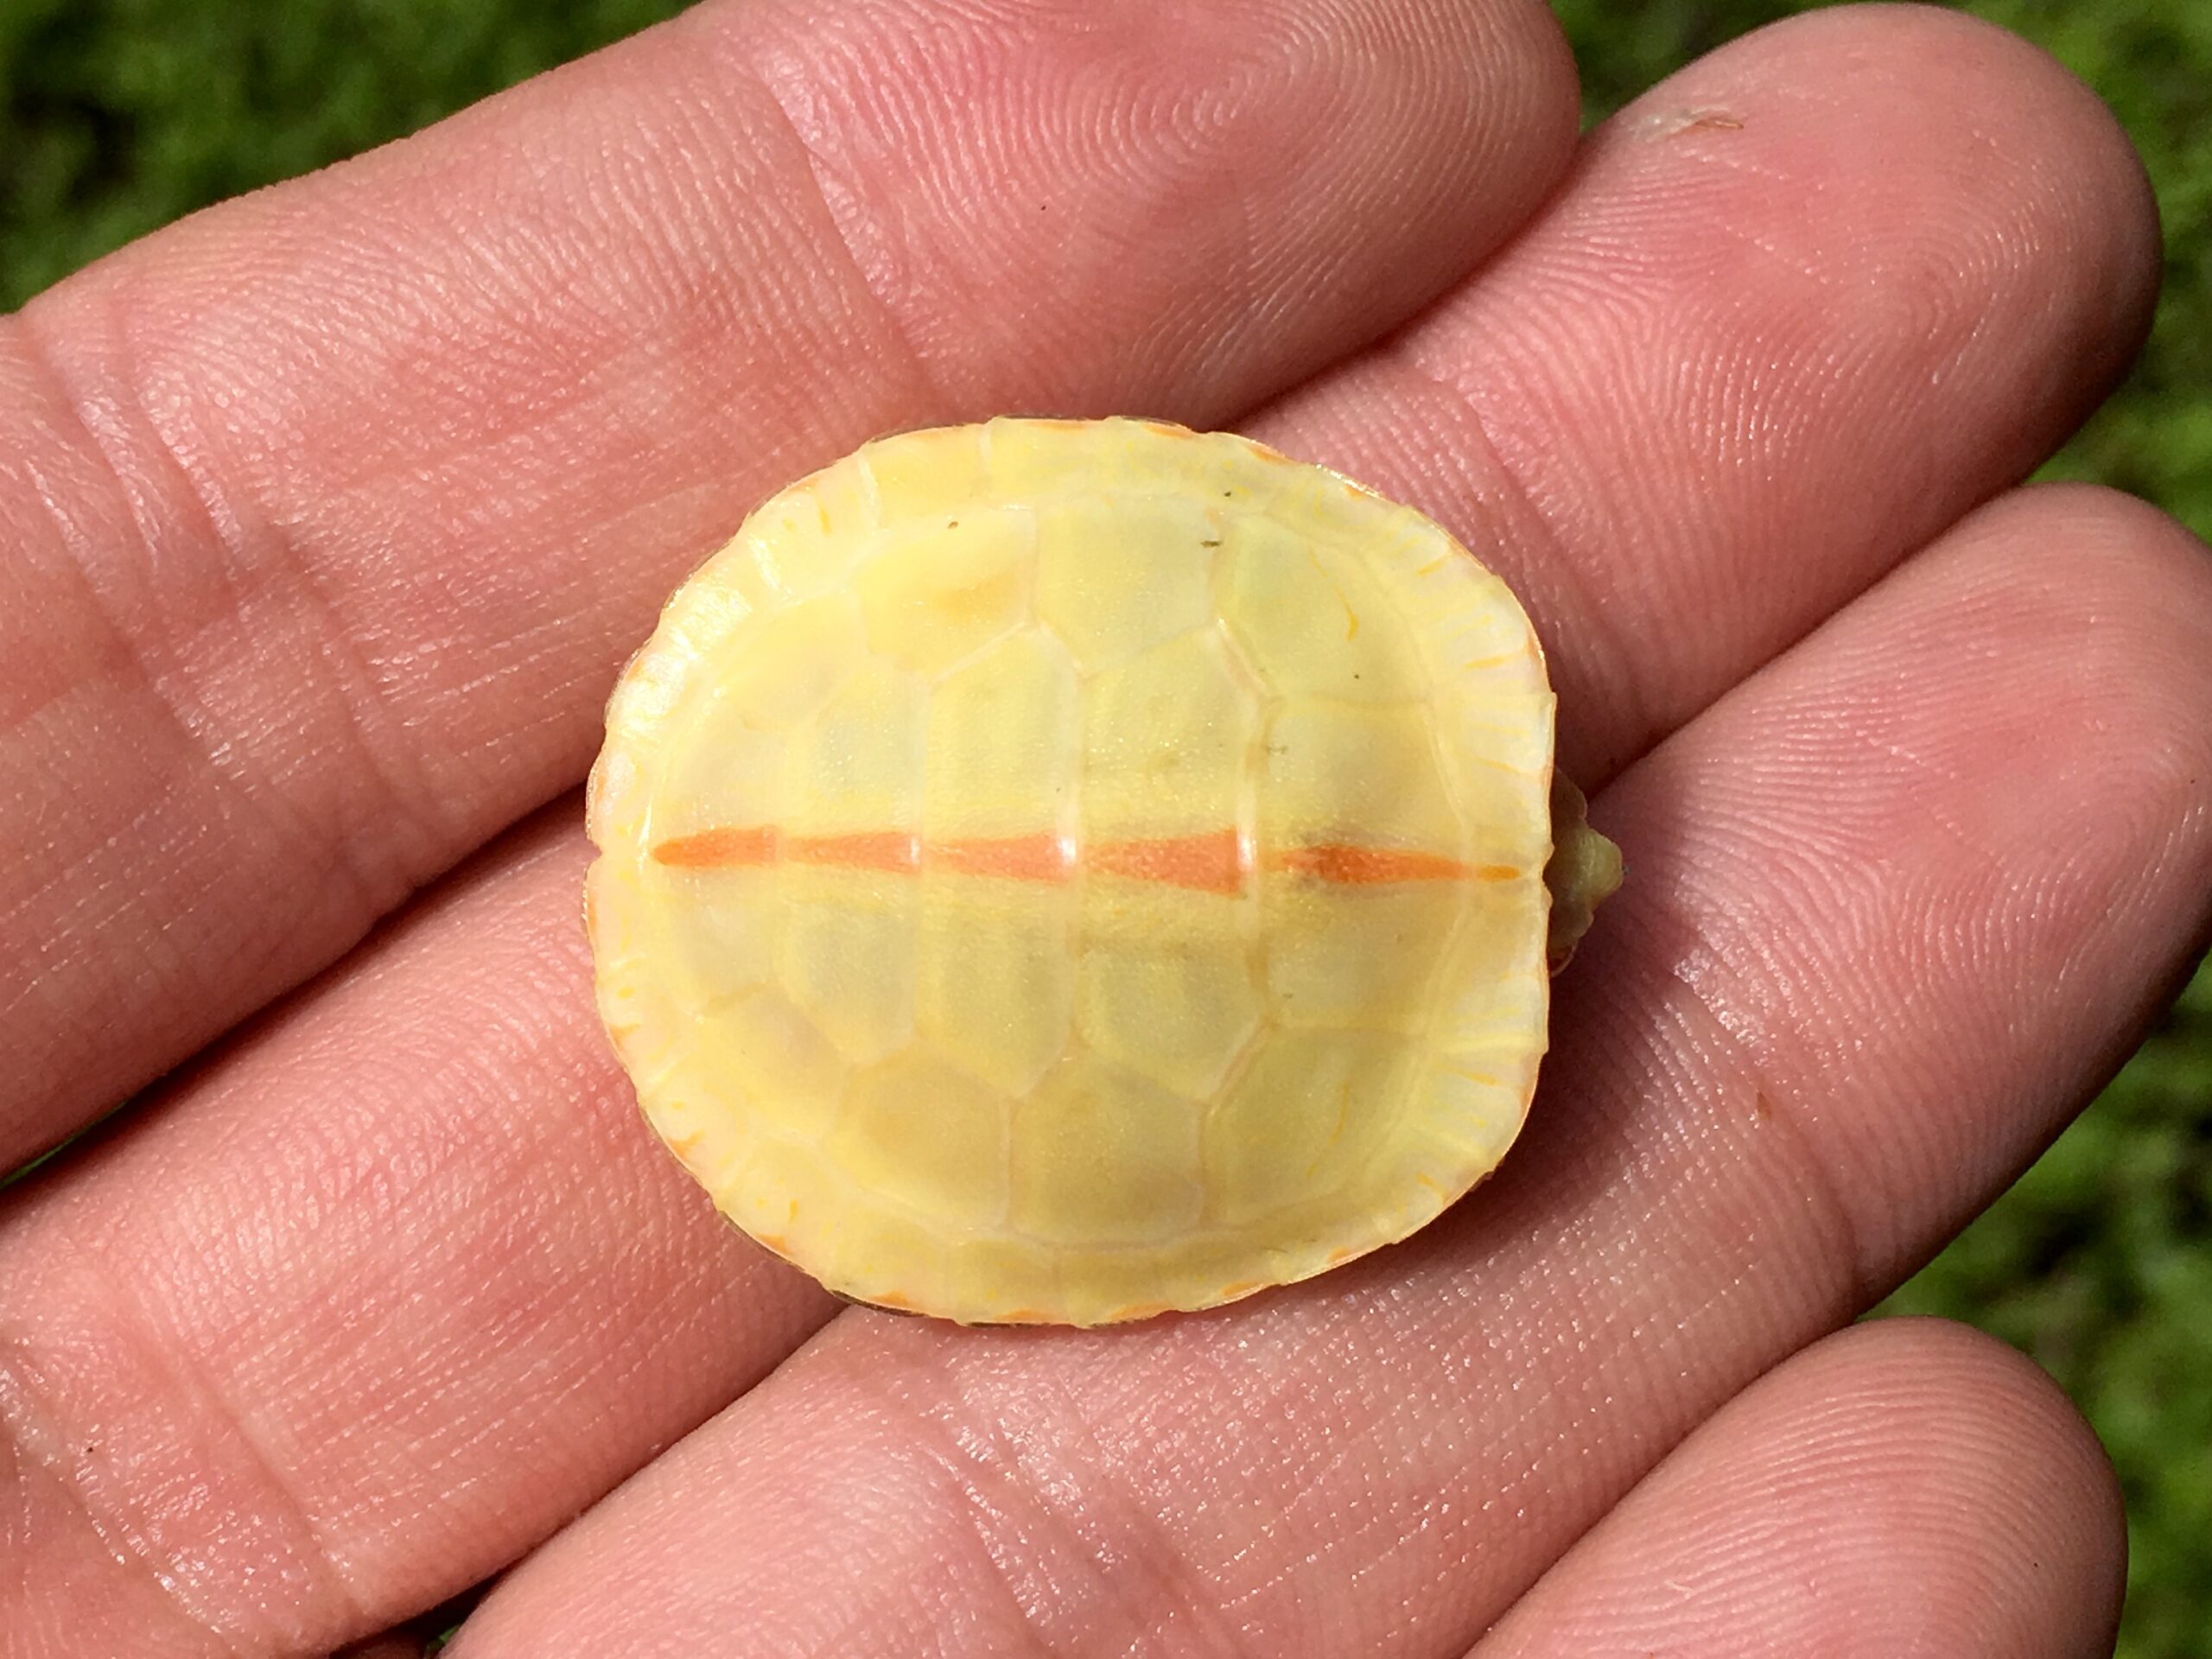 Albino Southern Painted Turtles for sale